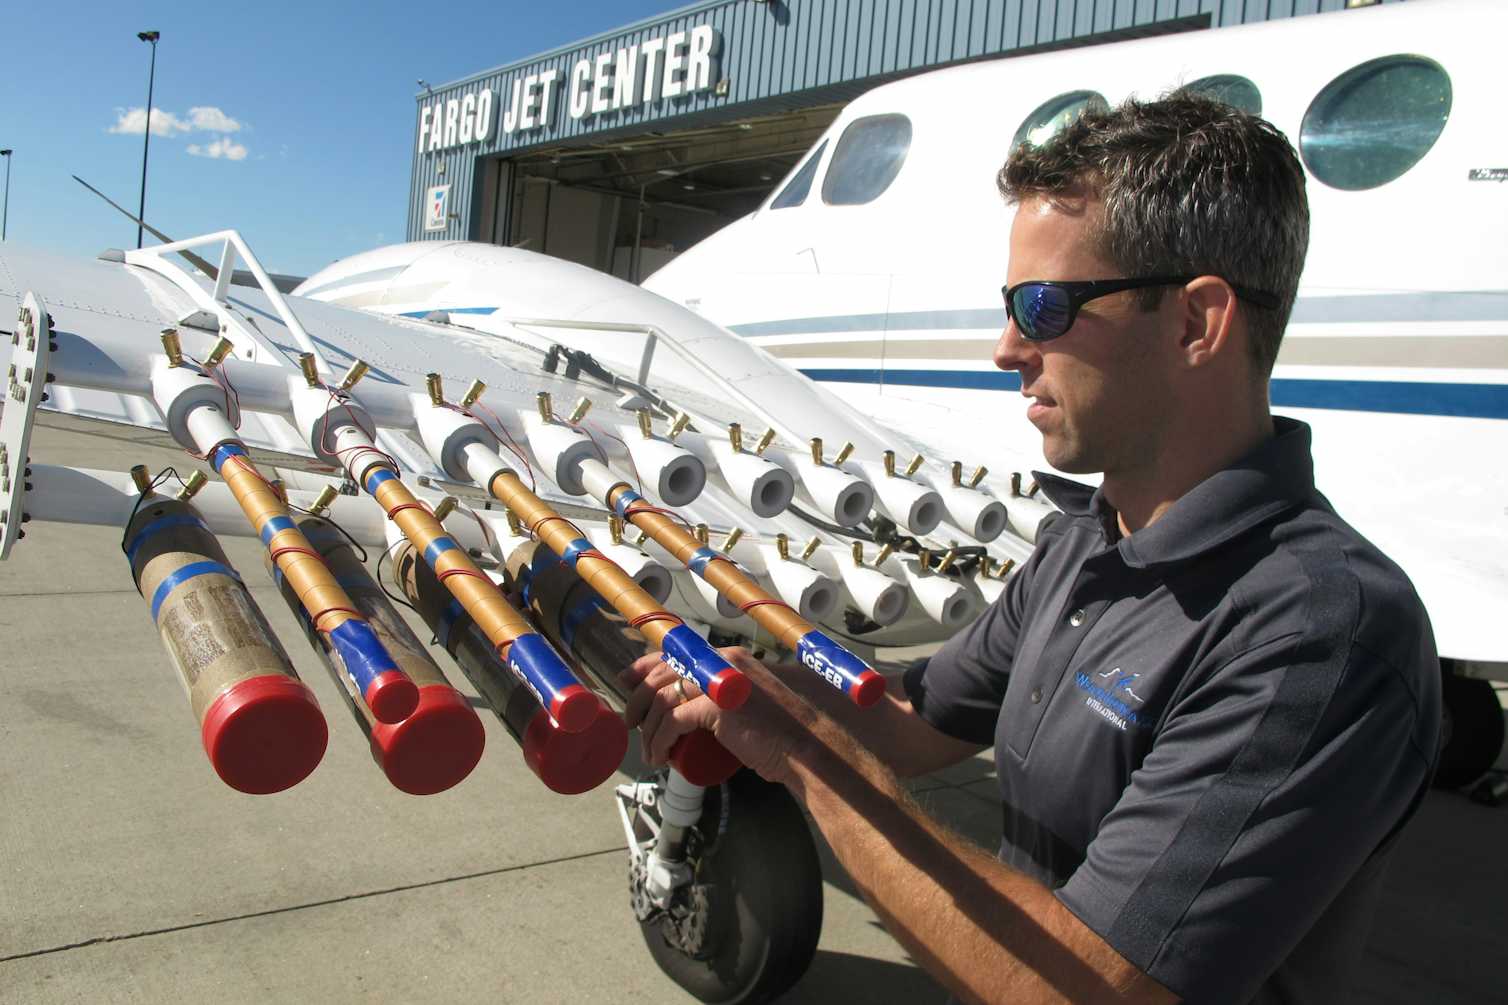 Cloud seeding might not be as promising as droughttroubled states hope